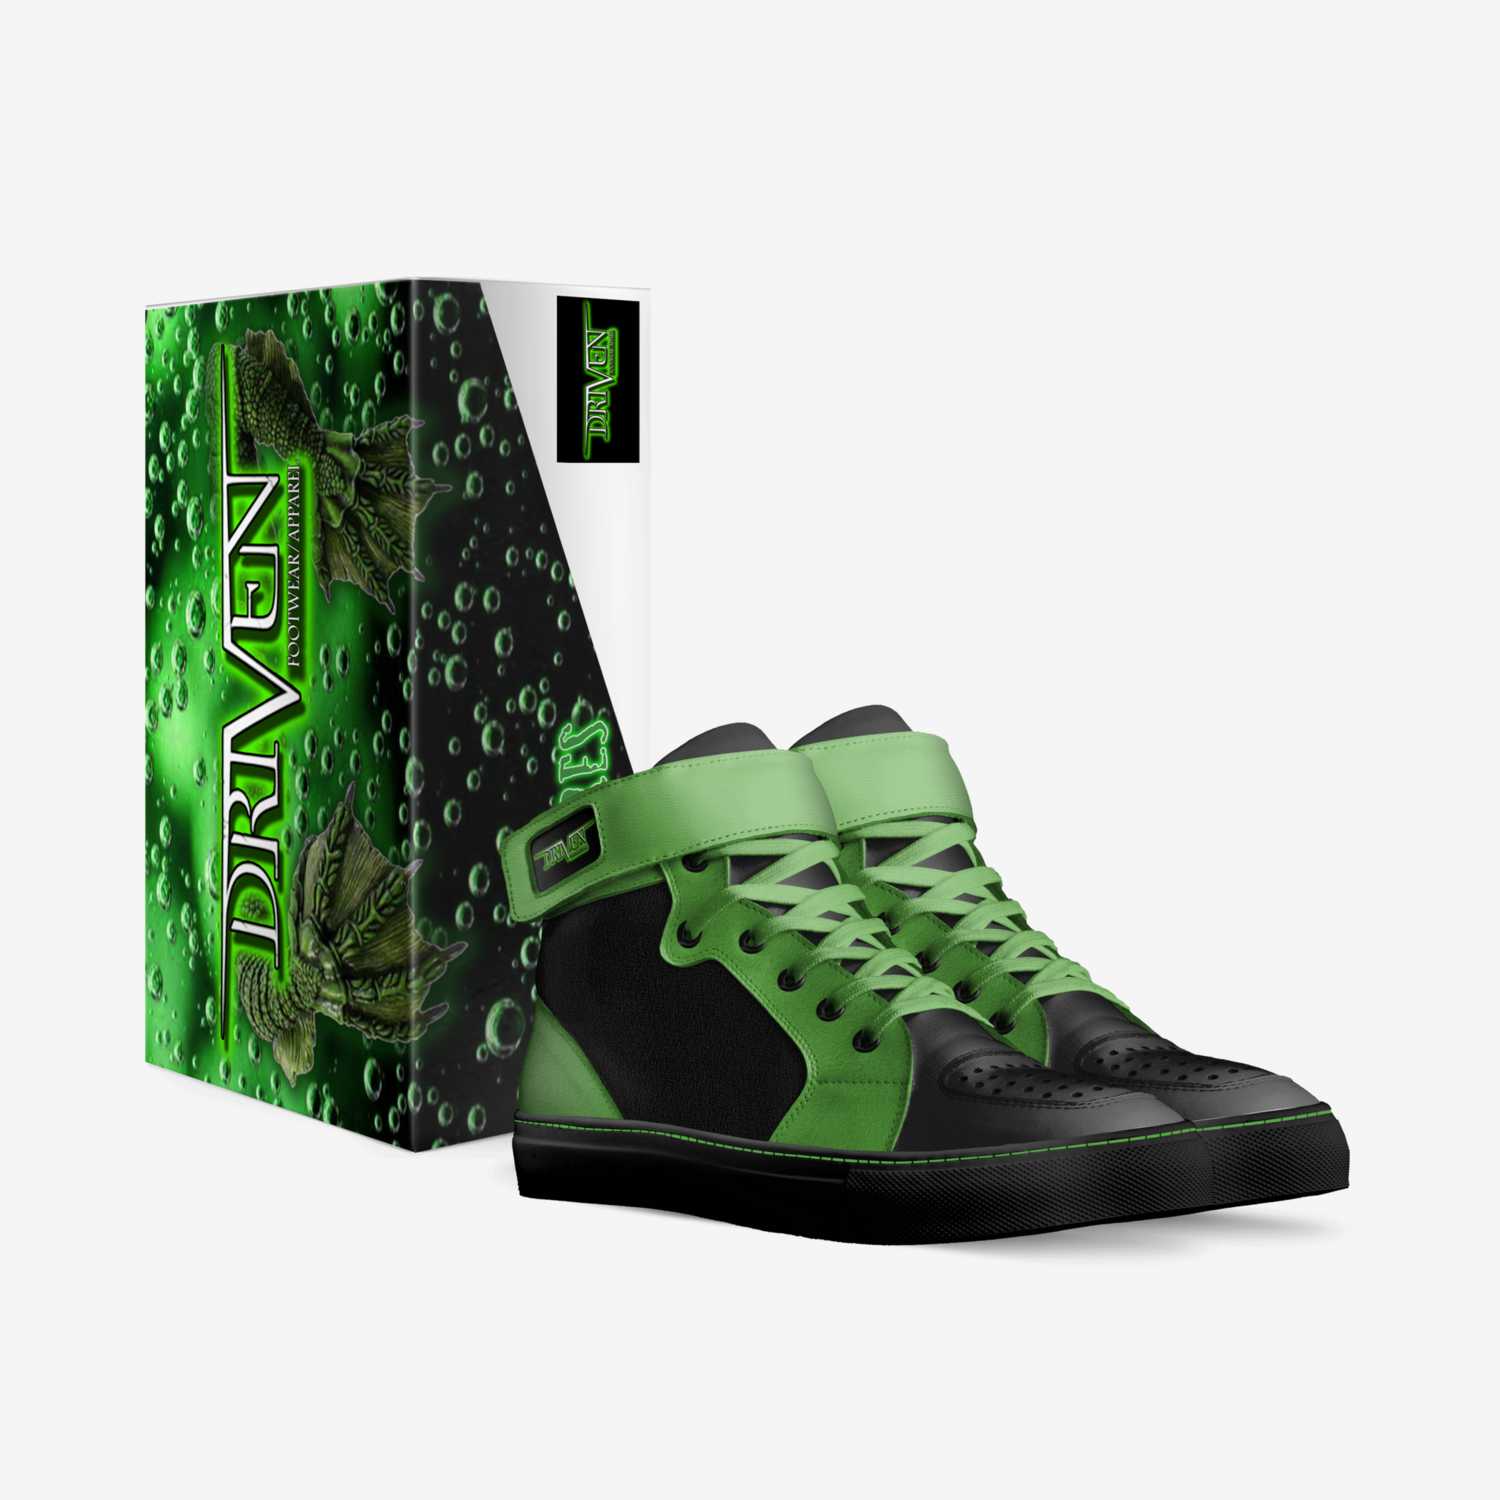 Driven creatures custom made in Italy shoes by Jason Oberly | Box view